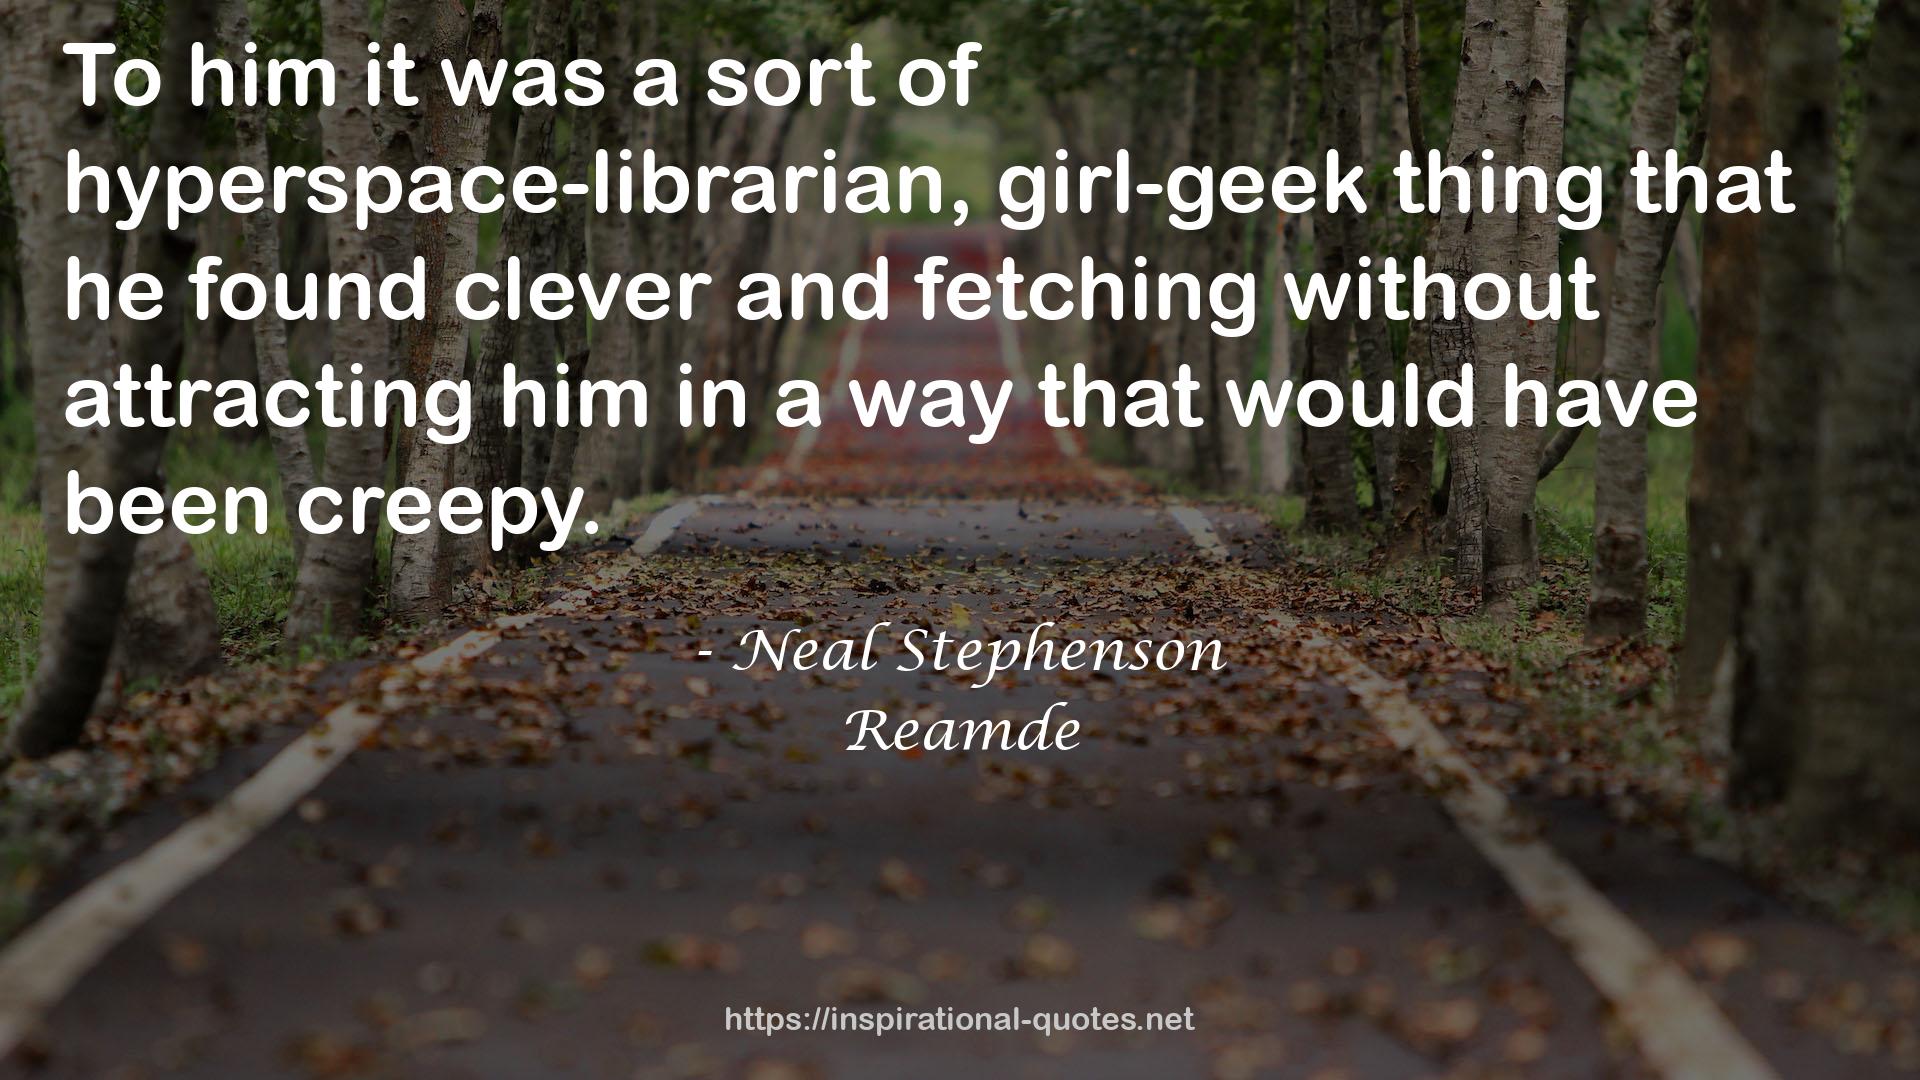 hyperspace-librarian, girl-geek thing  QUOTES